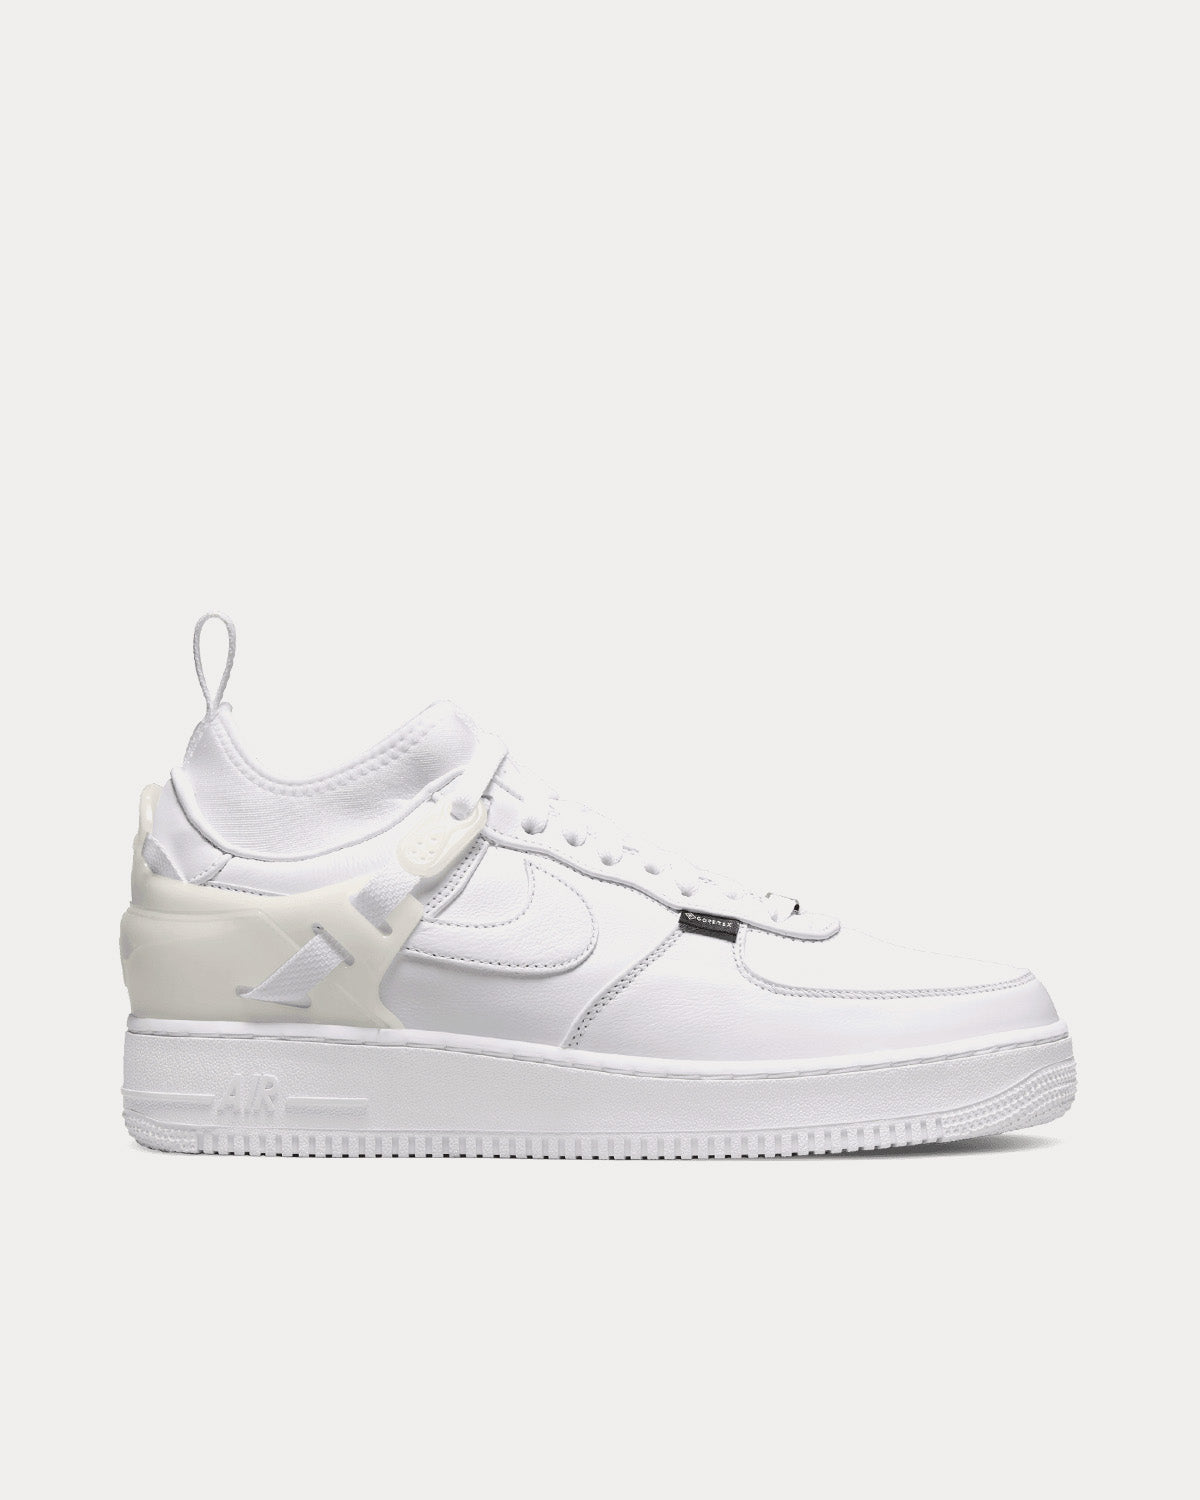 Nike x Undercover - Air Force 1 White Low Top Sneakers